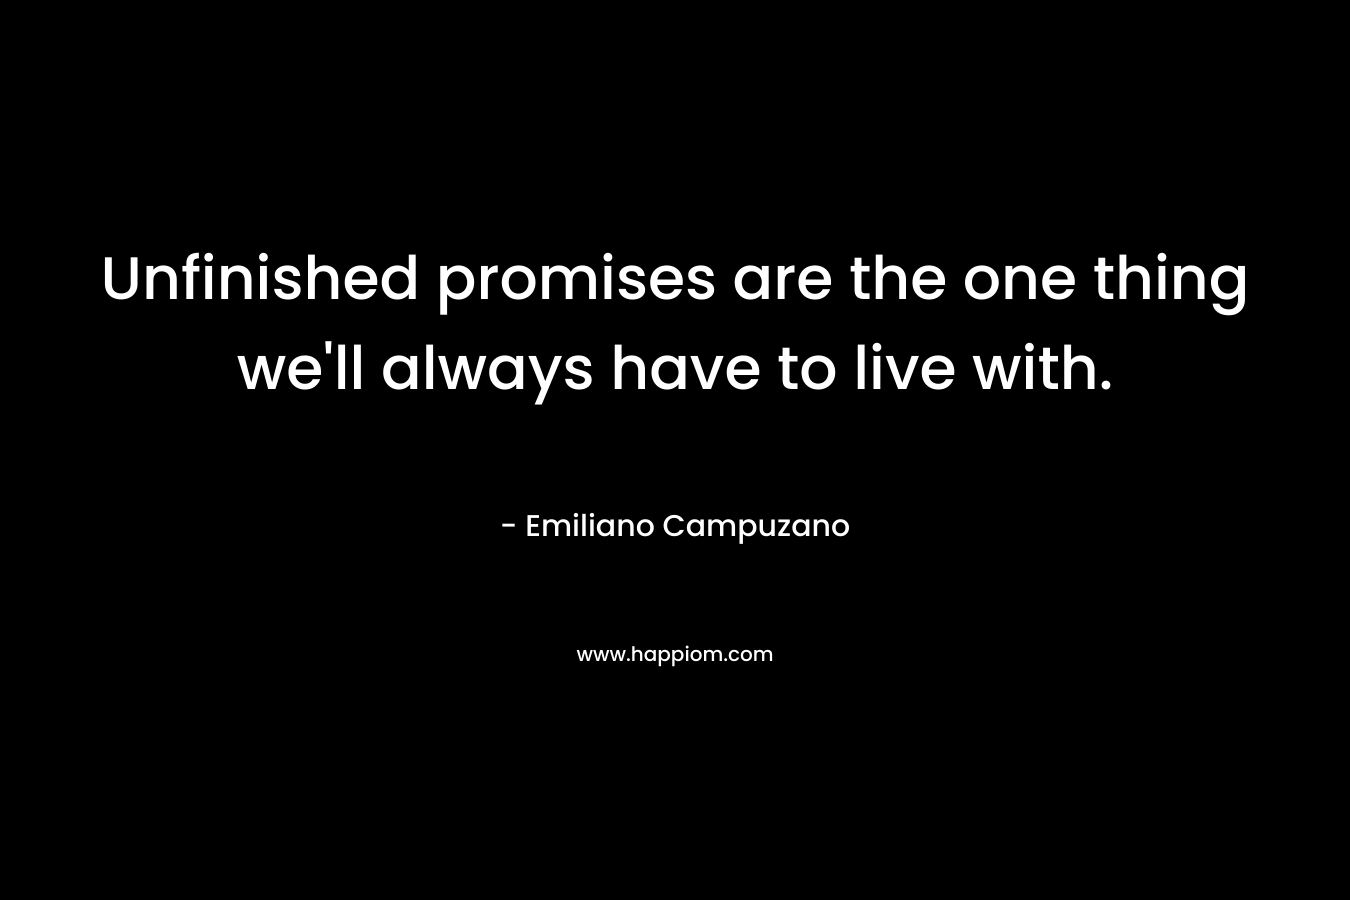 Unfinished promises are the one thing we’ll always have to live with. – Emiliano Campuzano